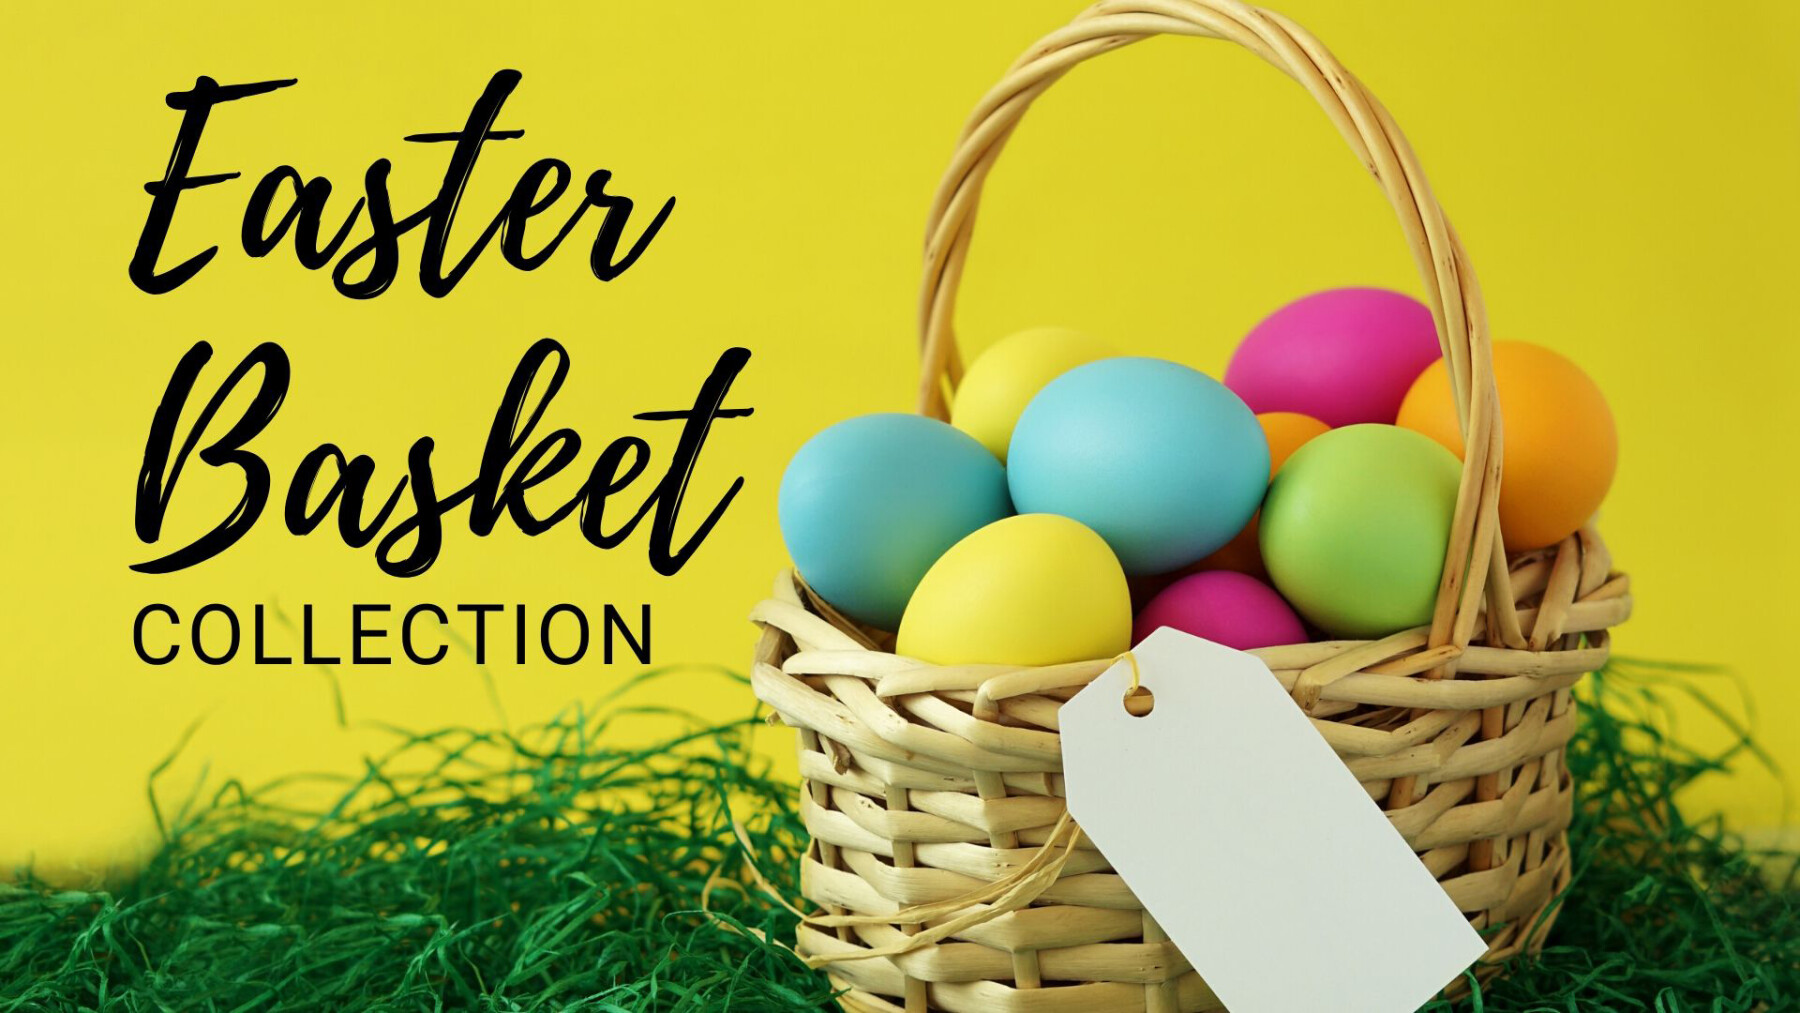 Annual Easter Basket Collection Flyers Available 